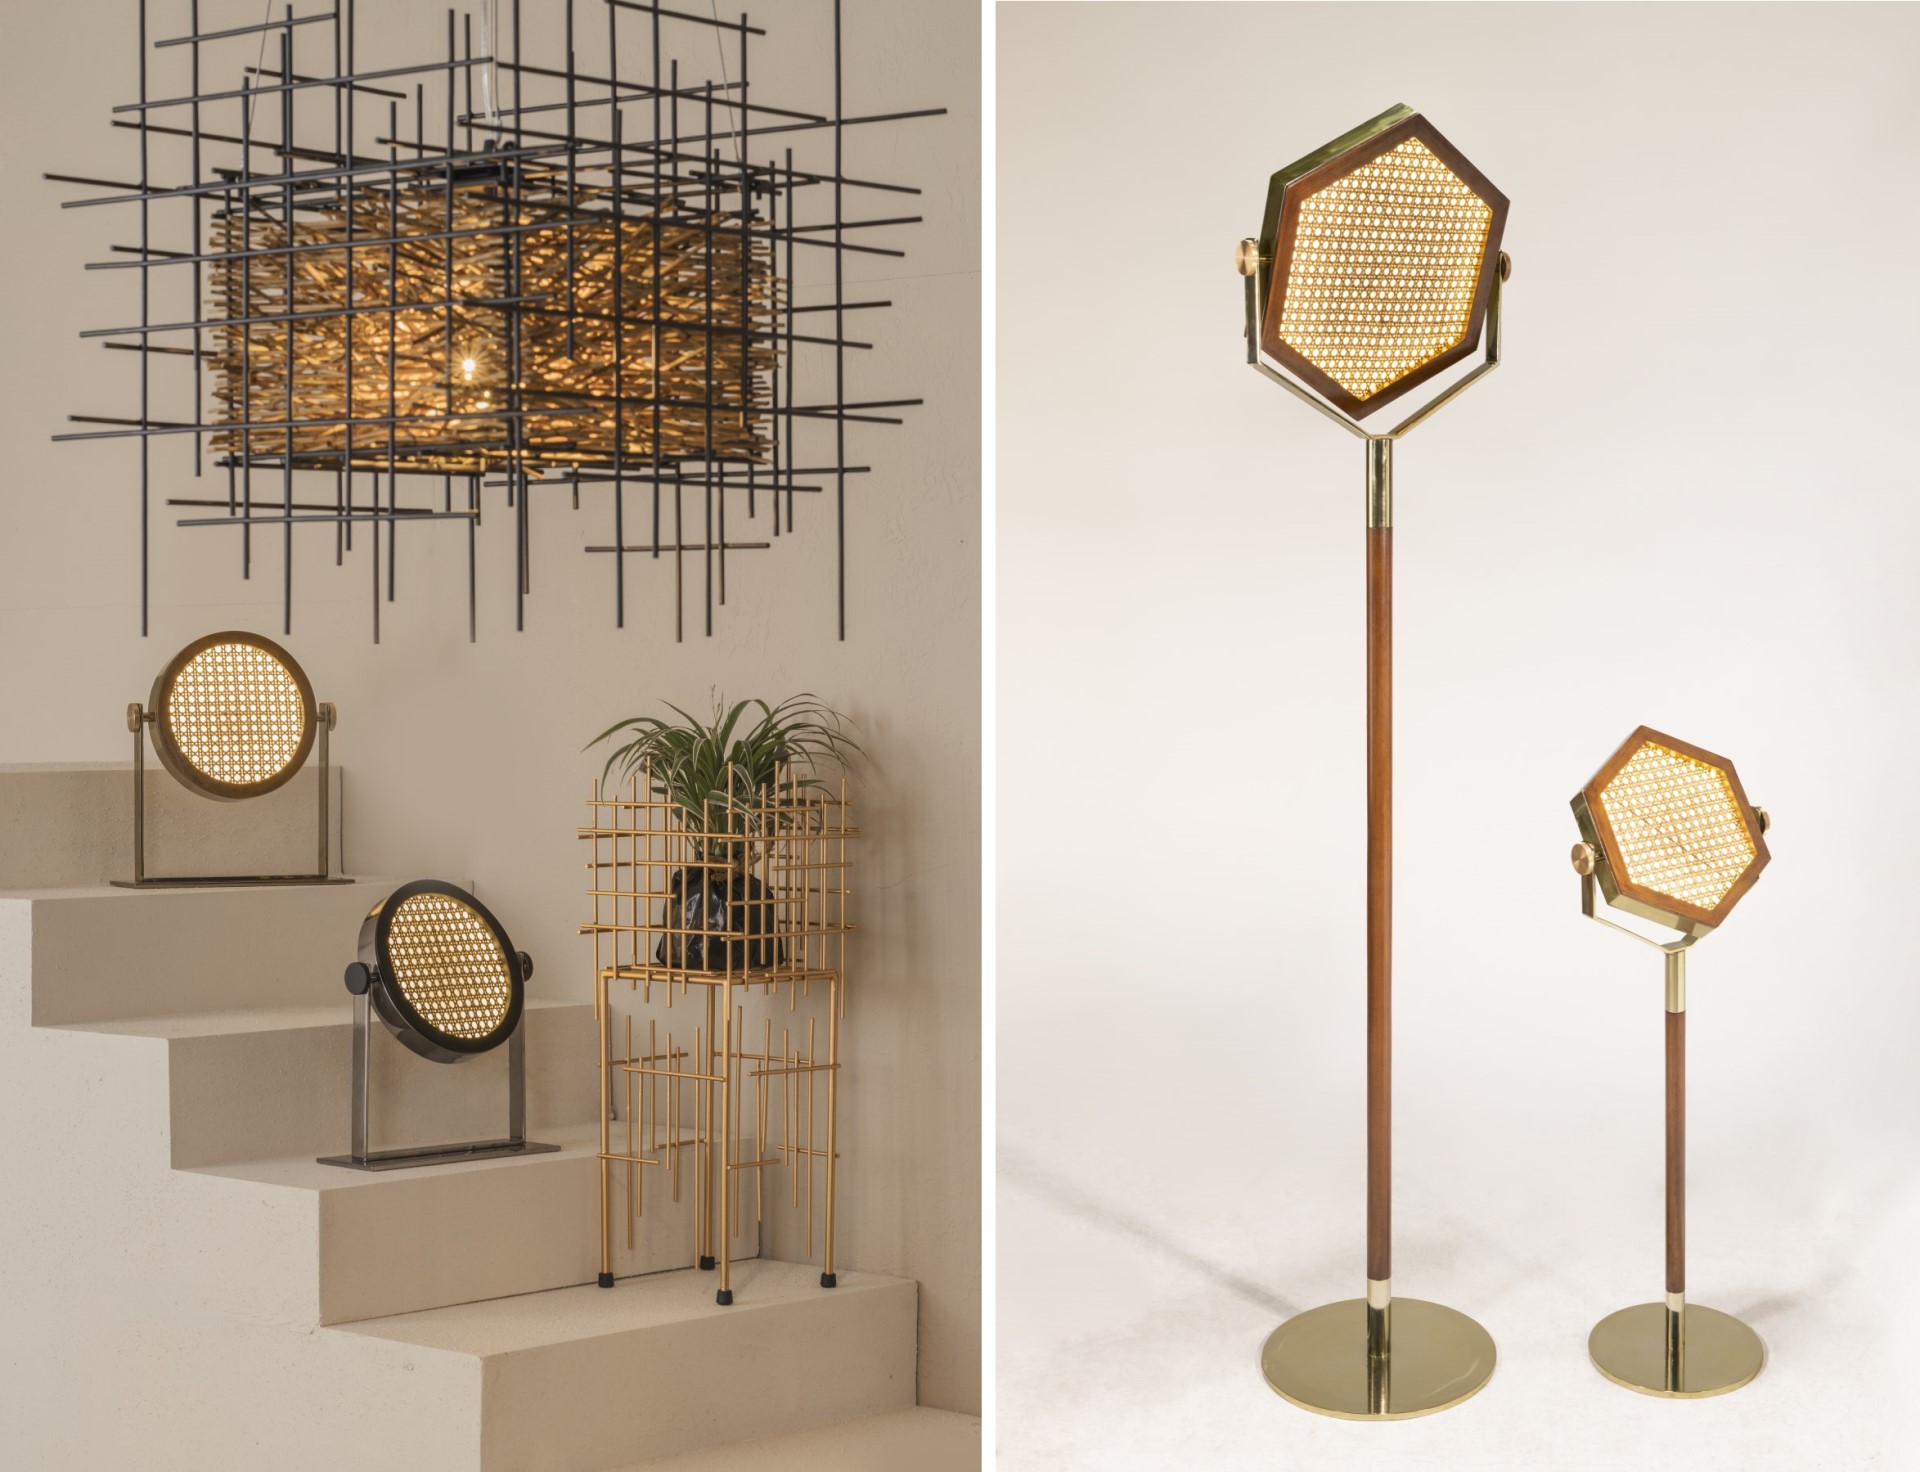 Benjamin Hexa Lamps in tobacco wood finish, stainless steel, and solihiya detail